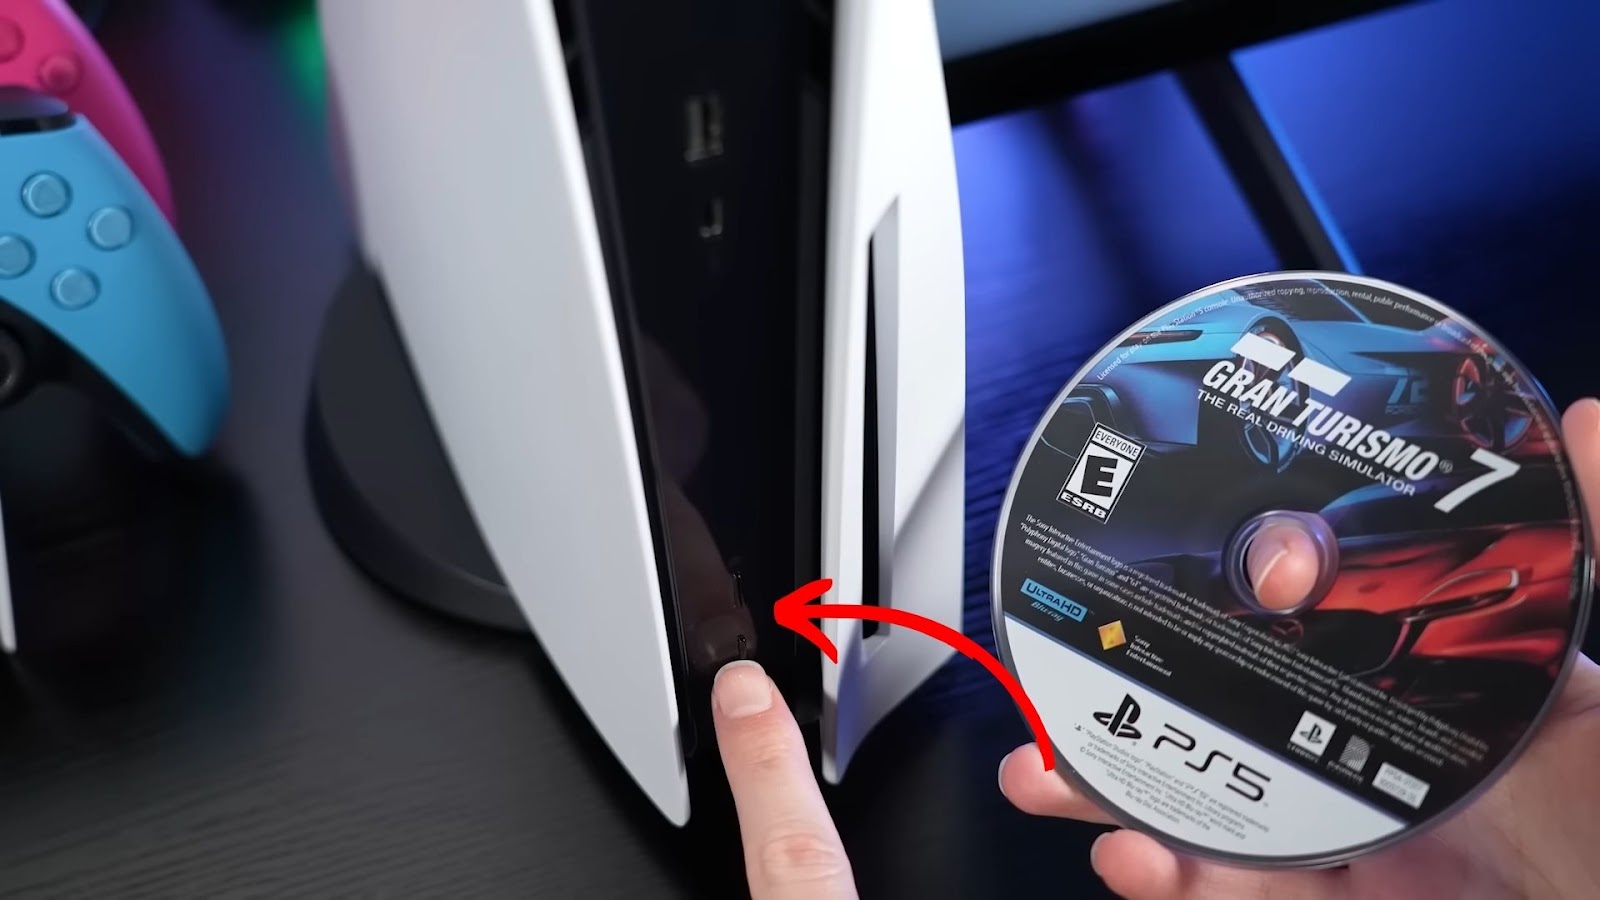 How to Correctly Insert a PS5 Disc